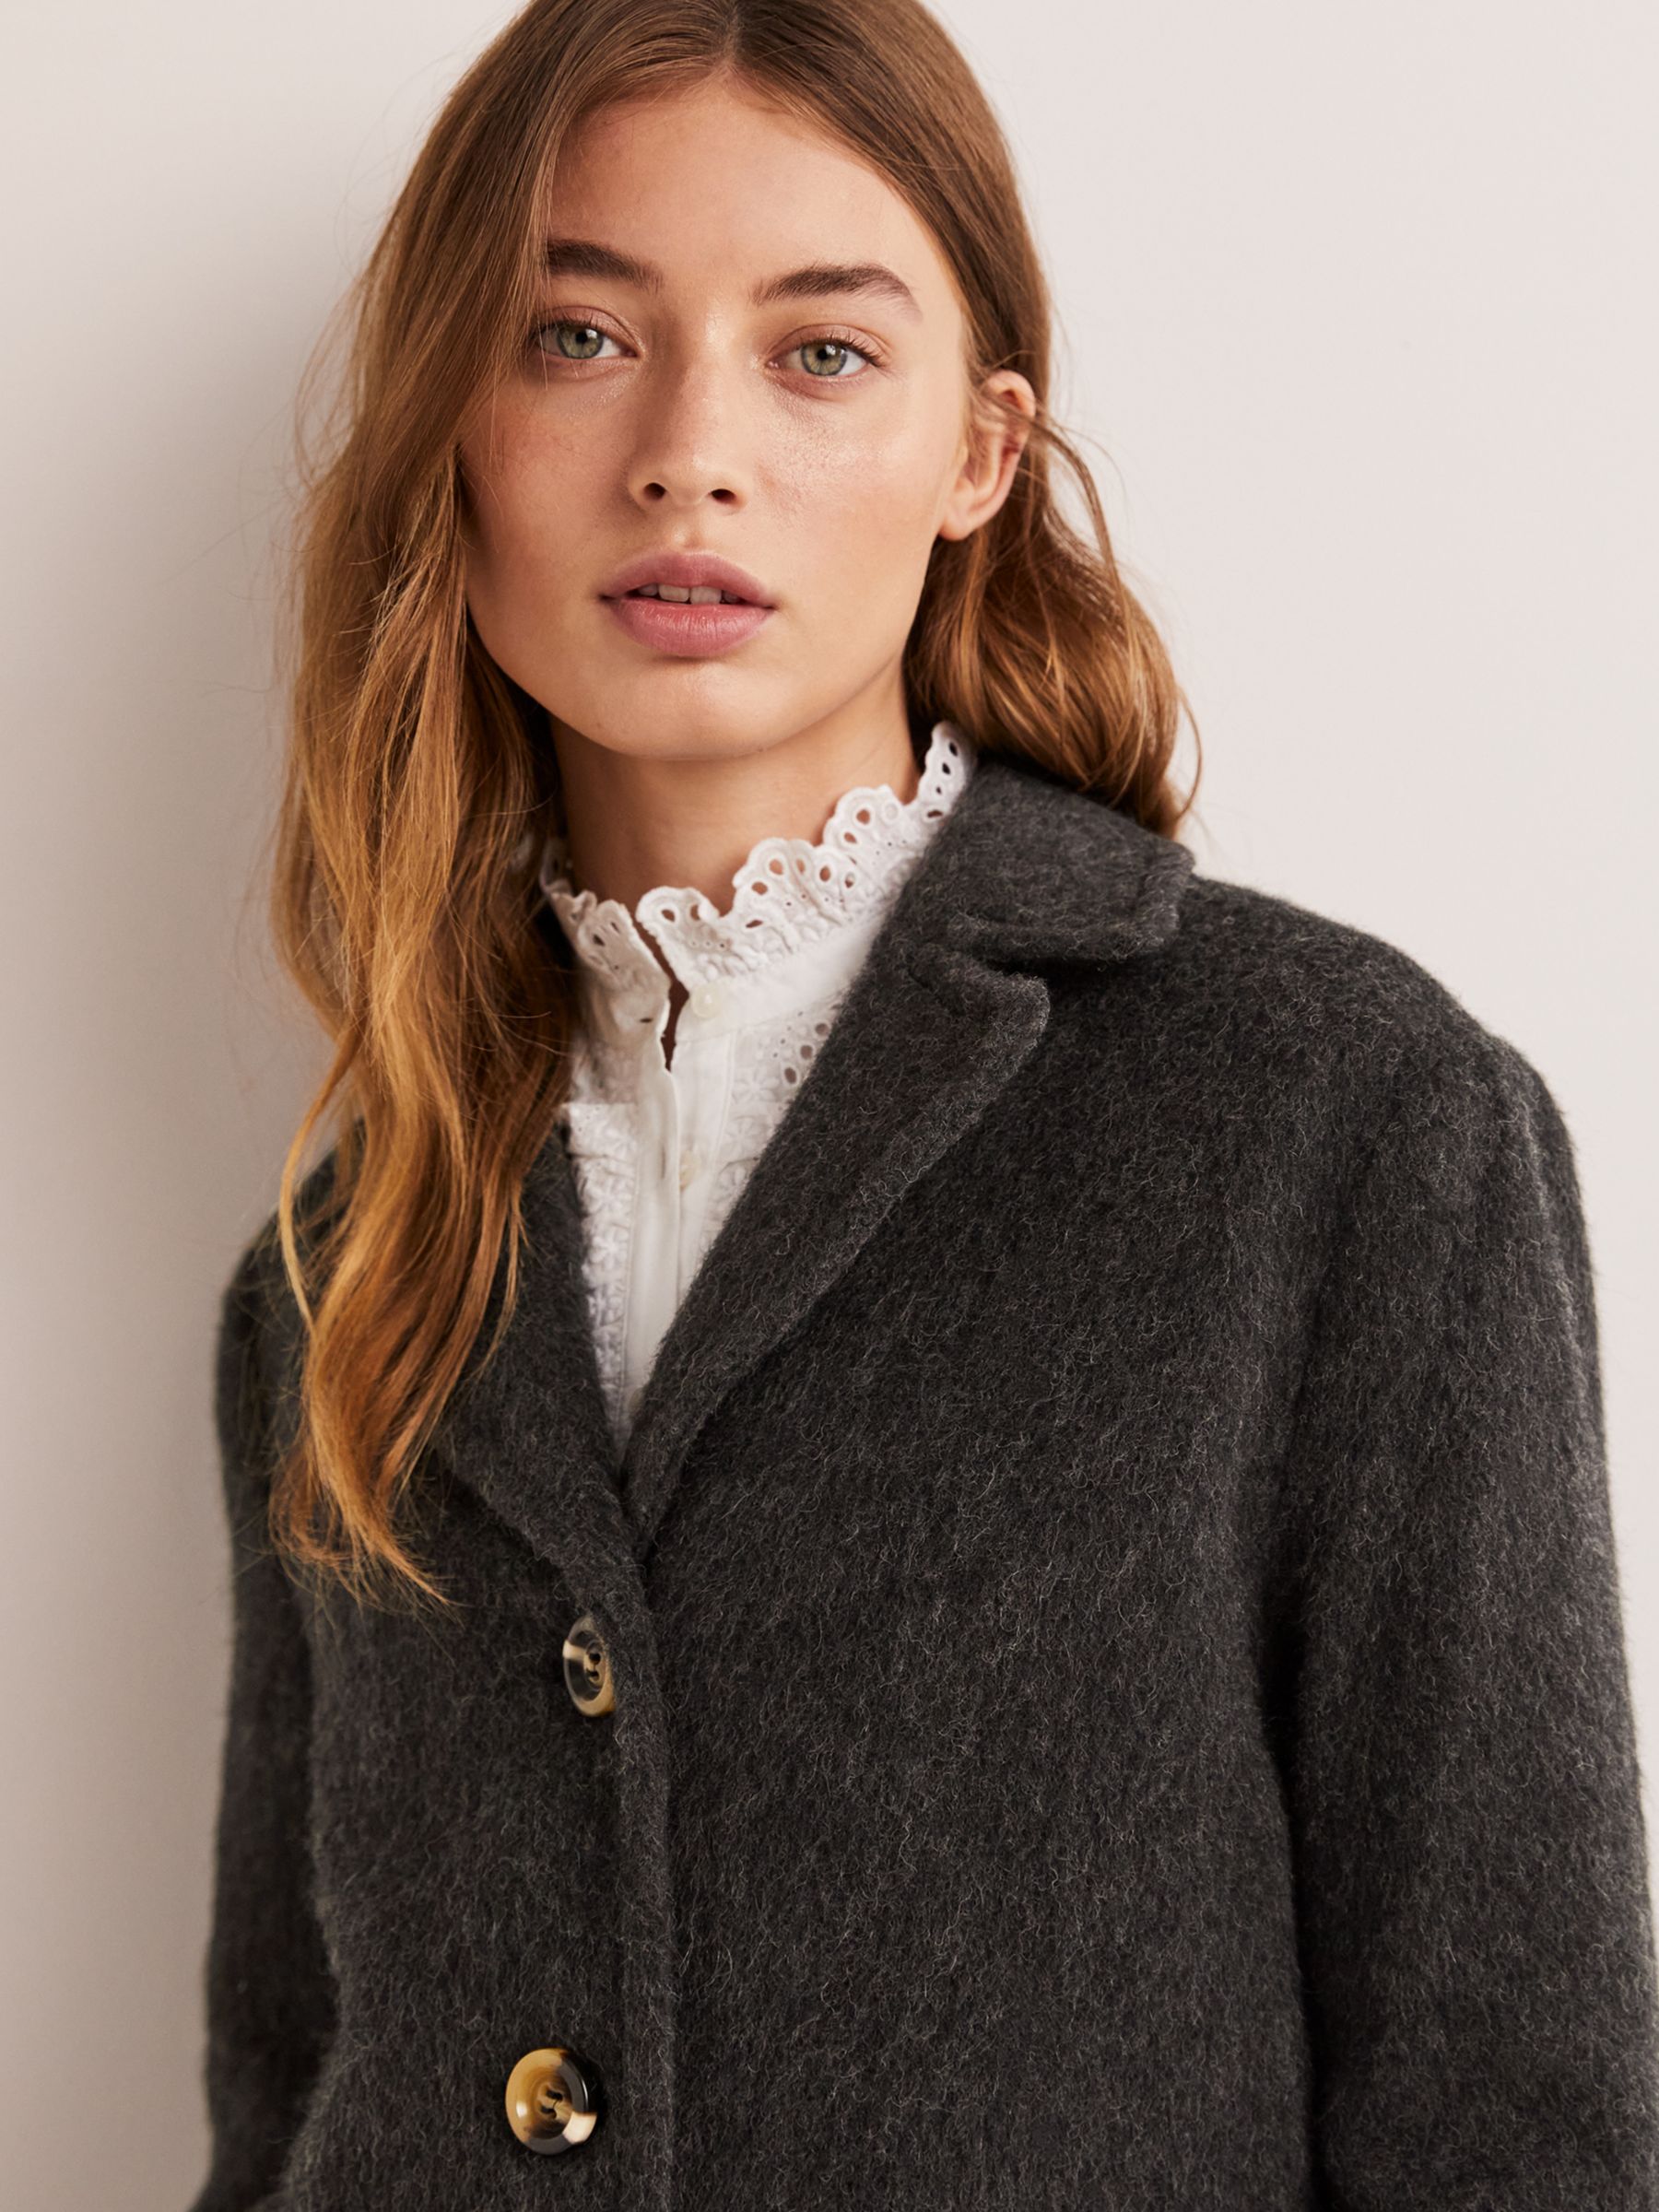 Boden Italian Wool Blend Collared Coat, Charcoal at John Lewis & Partners